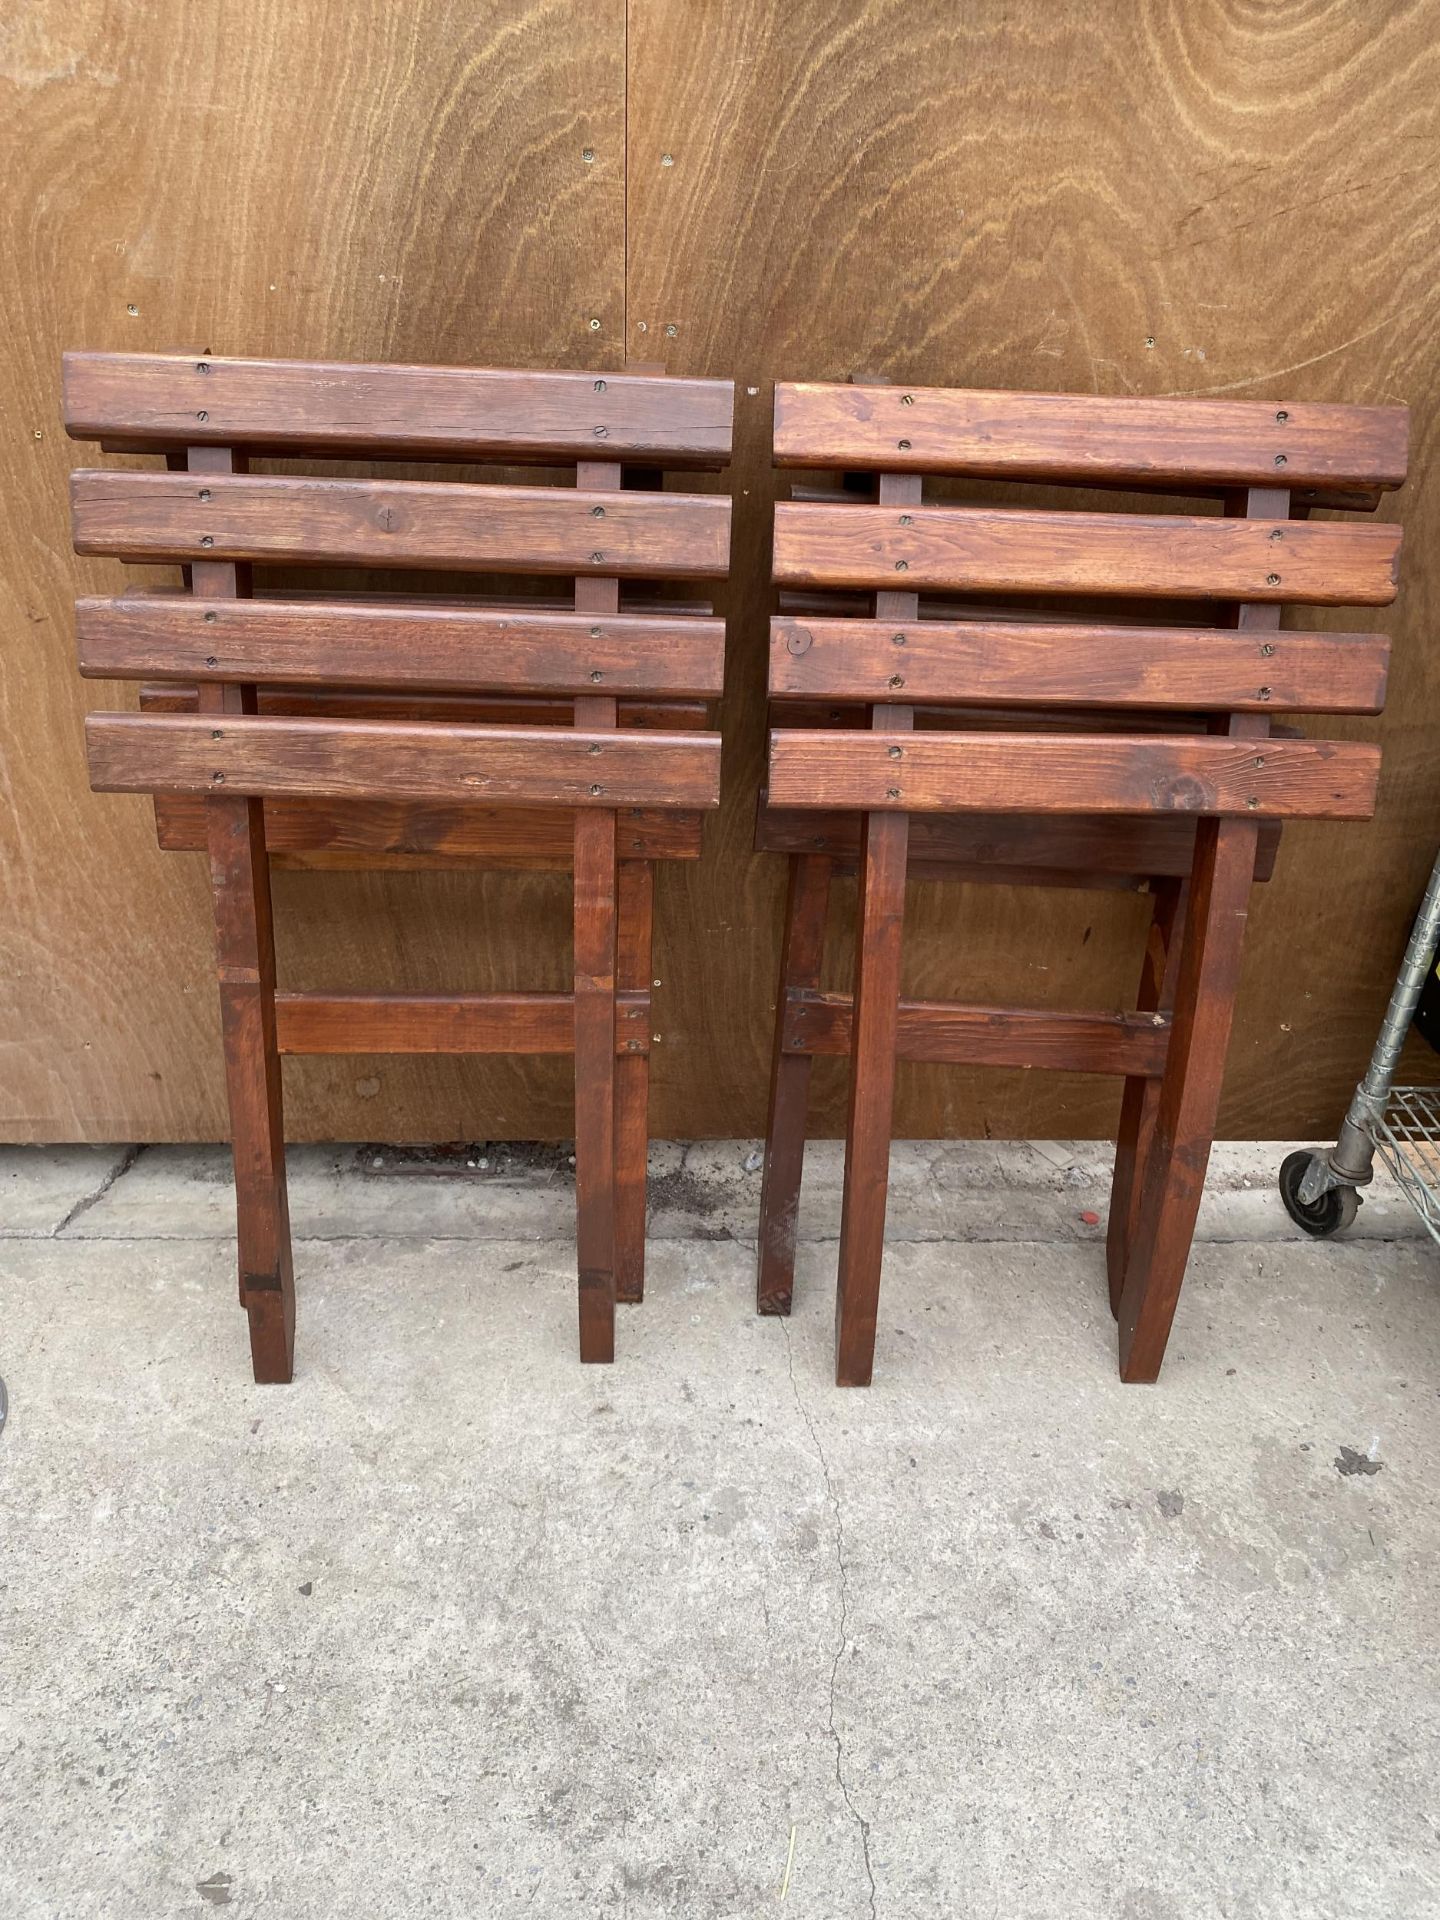 A PAIR OF WOODEN SLATTED FOLDING BEACH HUT CHAIRS - Image 5 of 5